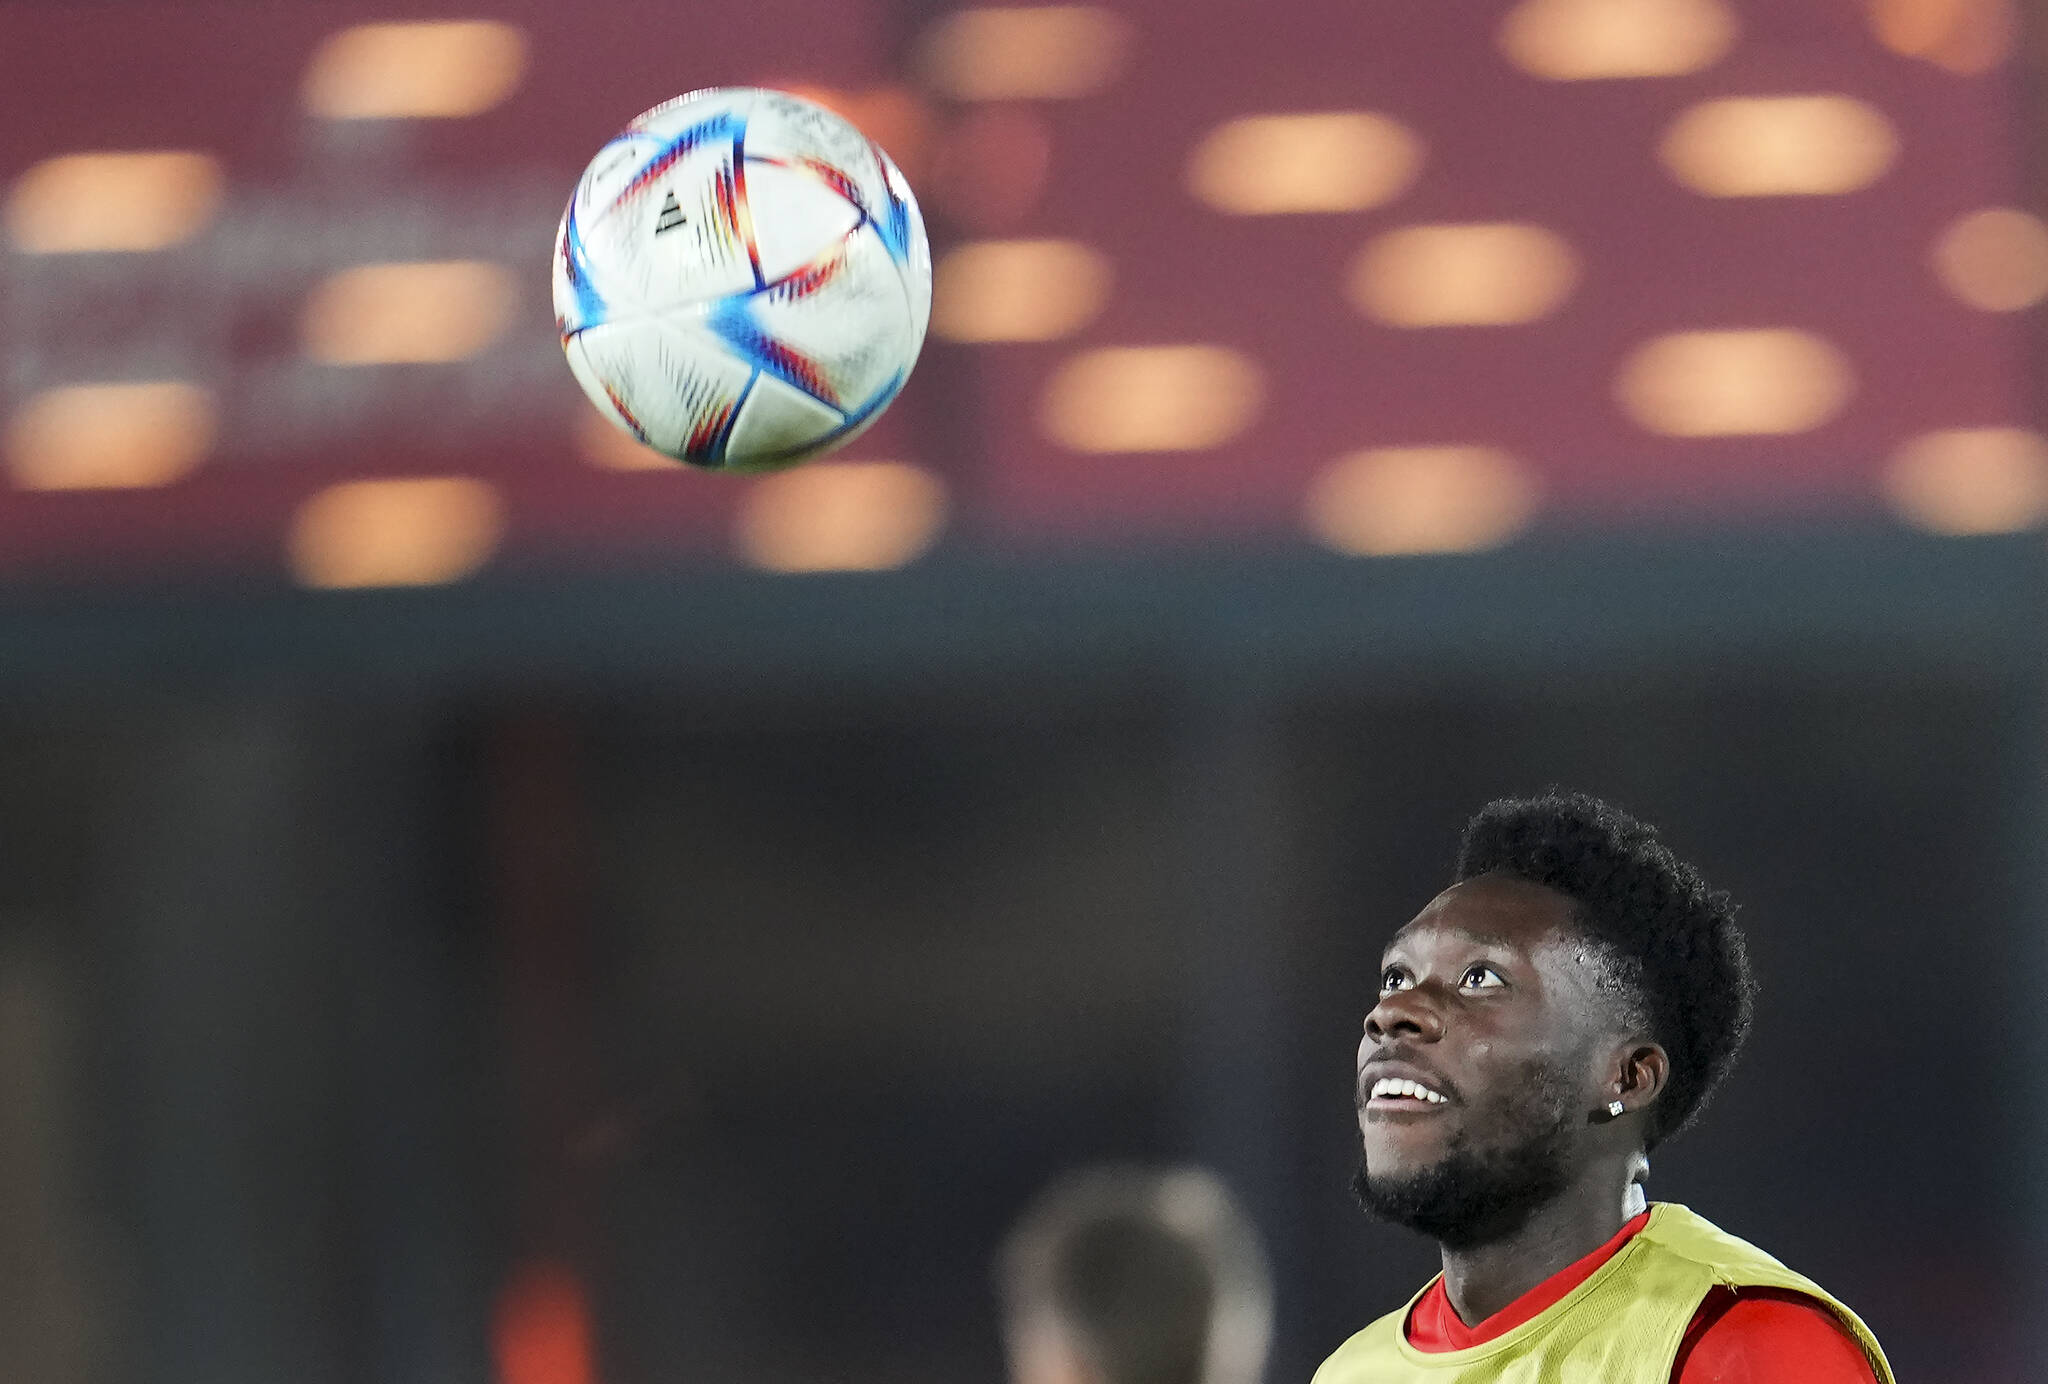 Canada forward Alphonso Davies eyes the ball during practice at the World Cup in Doha, Qatar, Tuesday, Nov. 22, 2022. THE CANADIAN PRESS/Nathan Denette